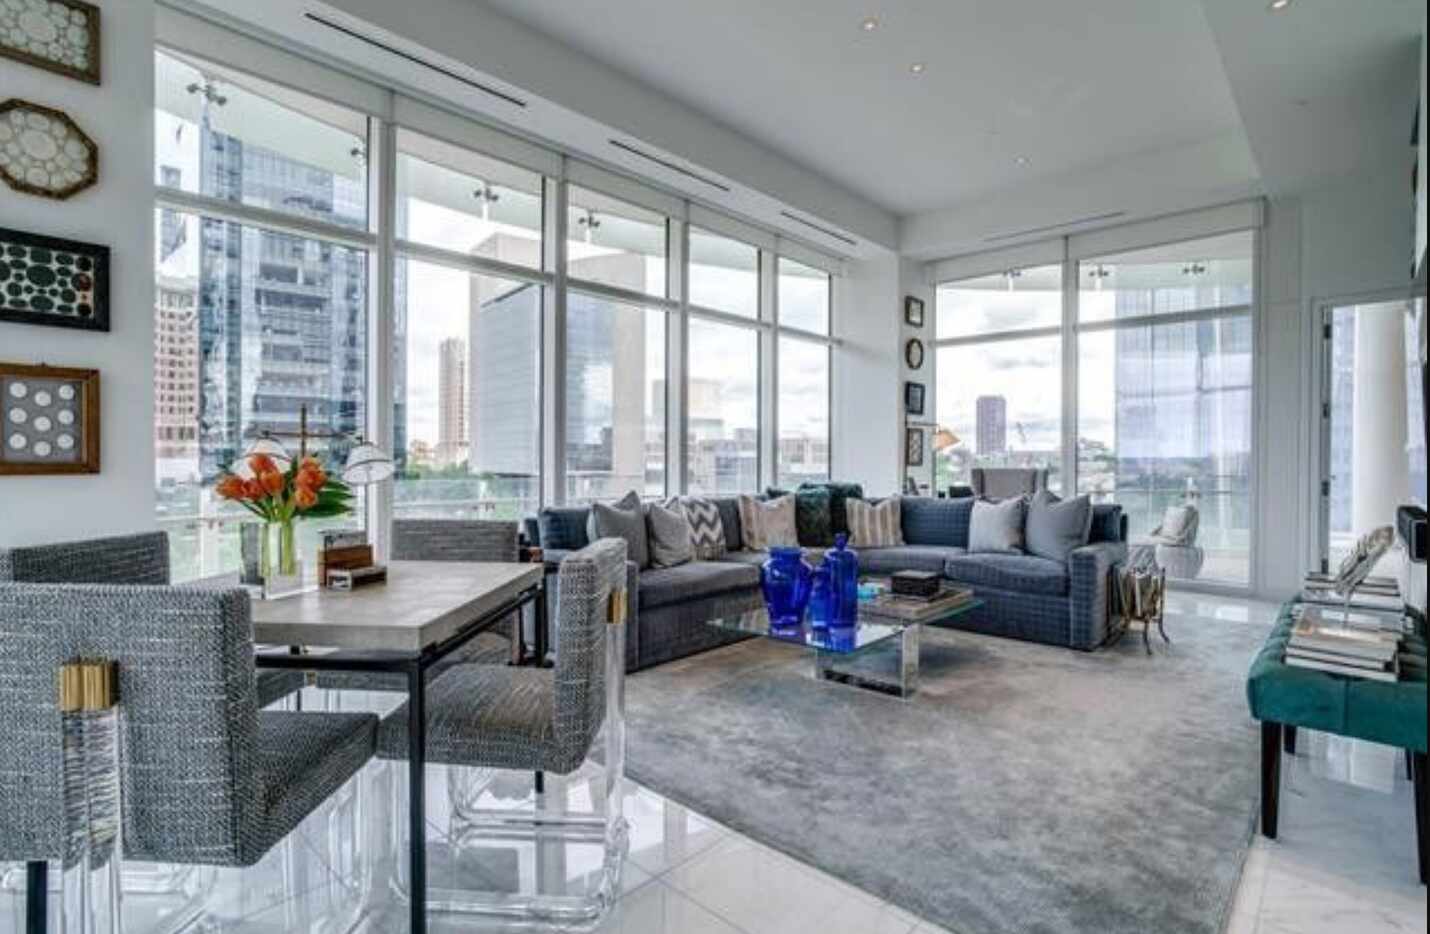 Missy Woehr with Compass Real Estate is marketing this $4.25 million condo at Museum Tower.